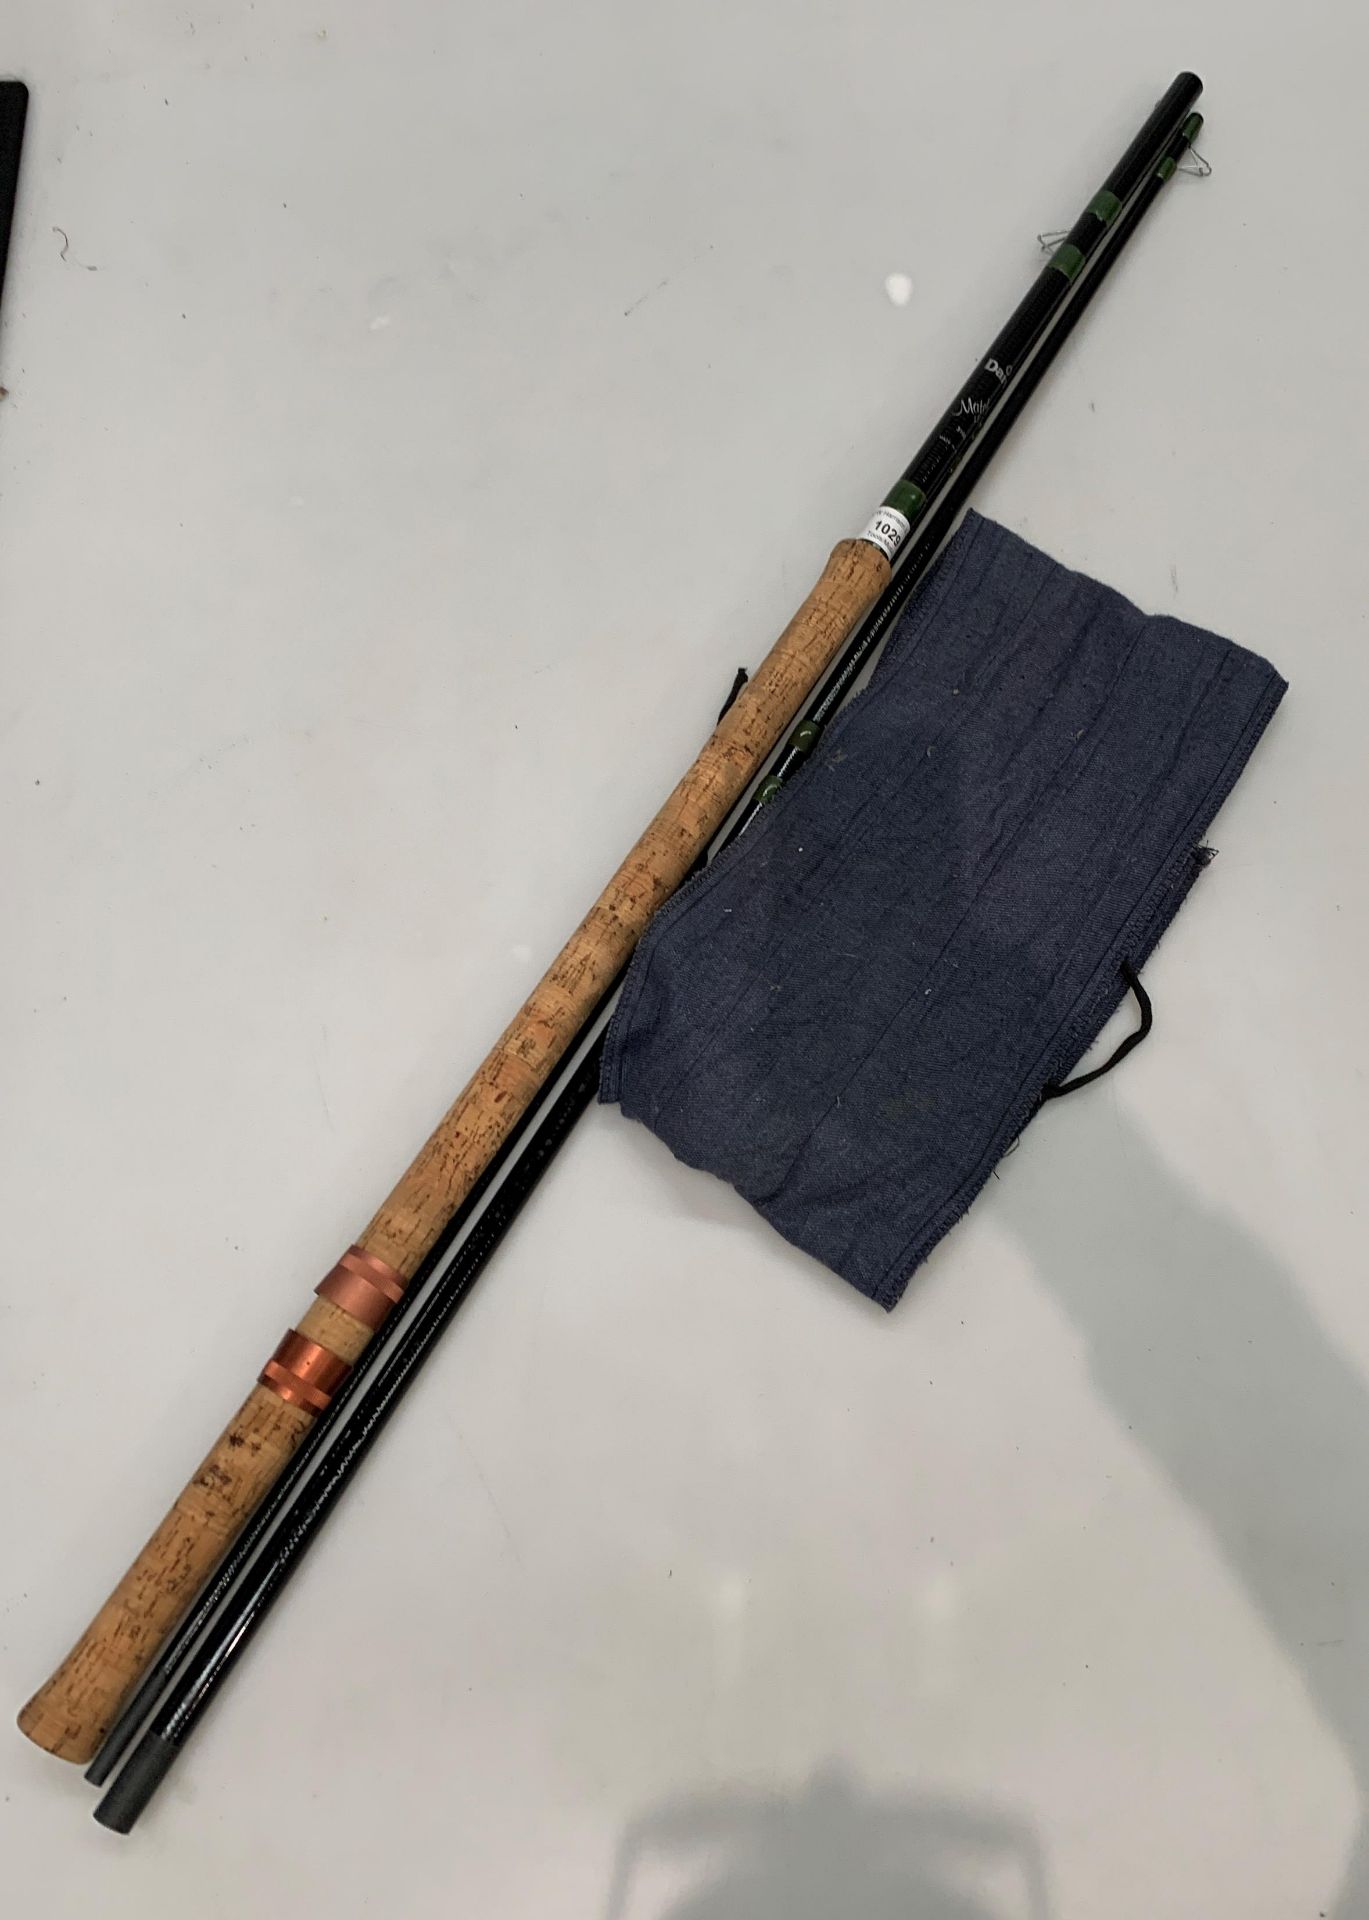 A Daiwa Matchman Leger 3160 9' three-piece fishing rod complete with bag - Image 2 of 2